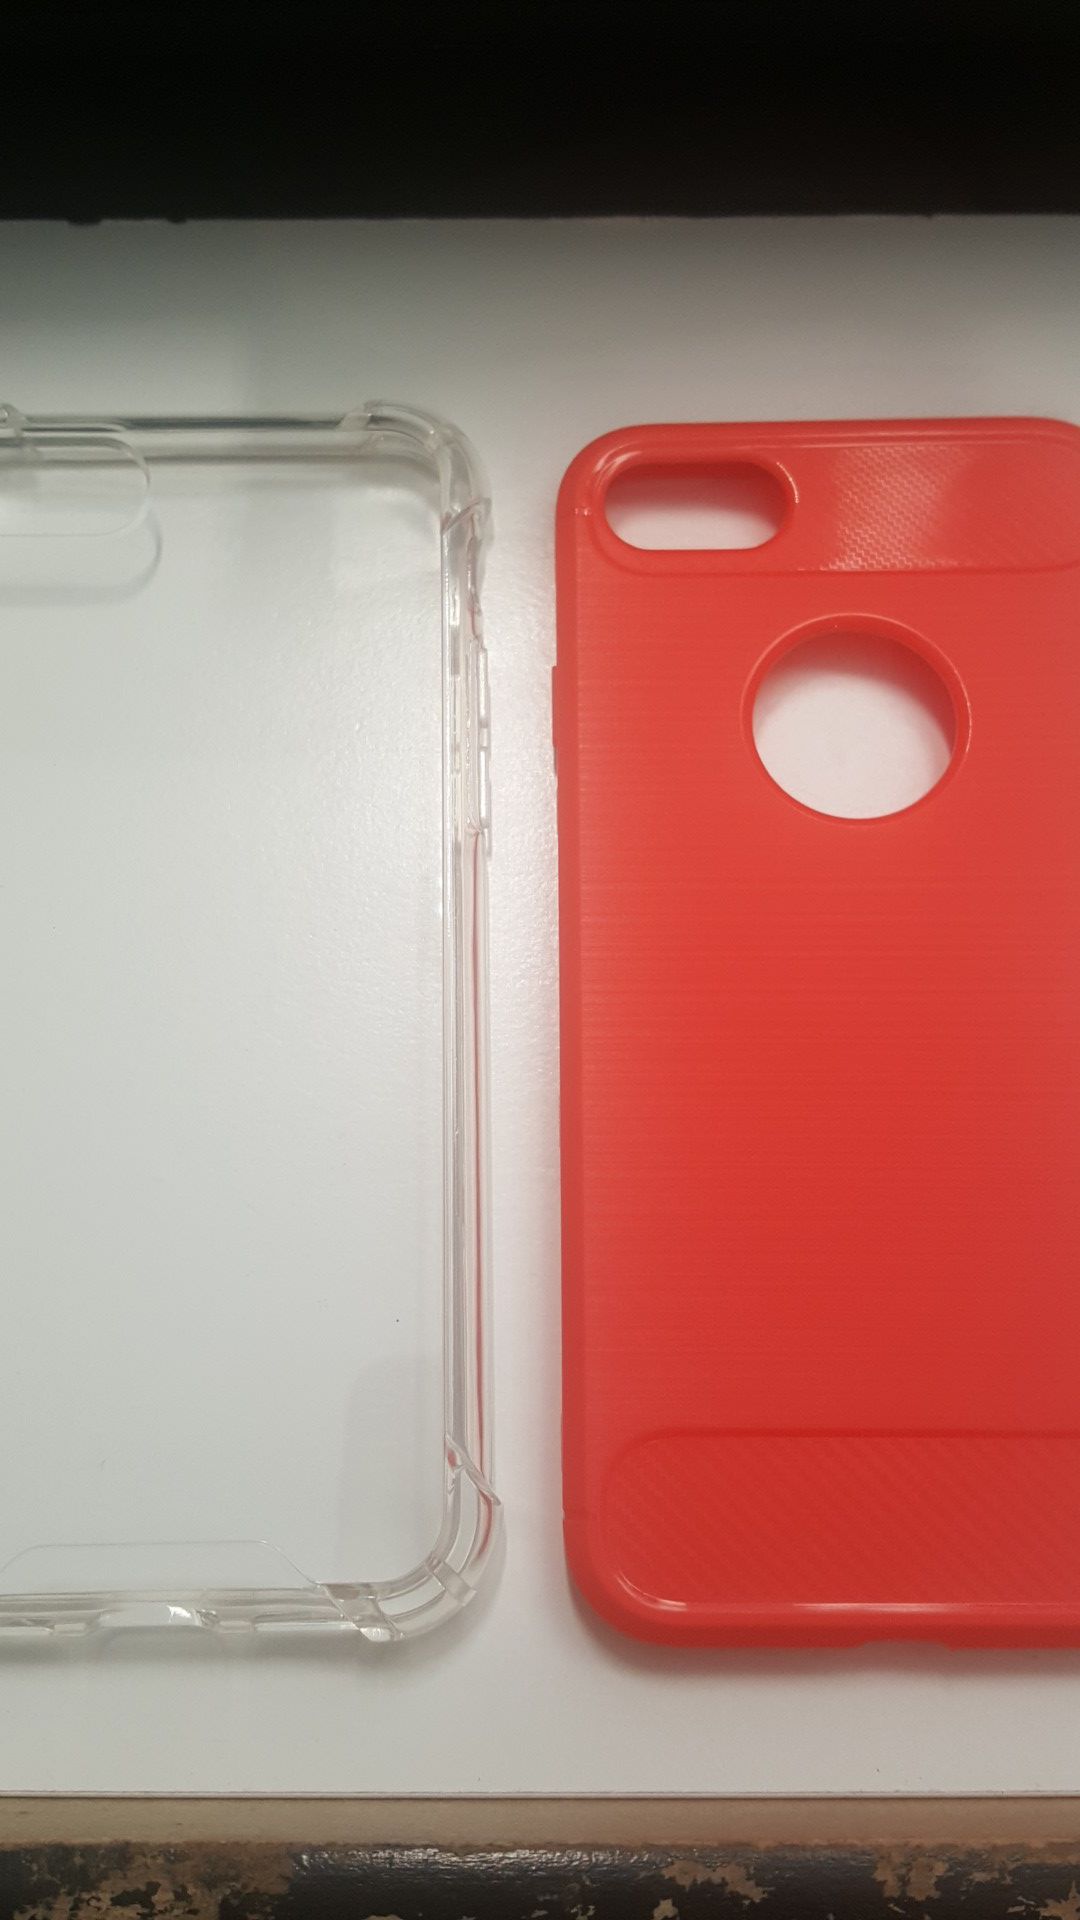 2 cases for iphone 7/8 4.7" not plus color red new 7firm shiping only